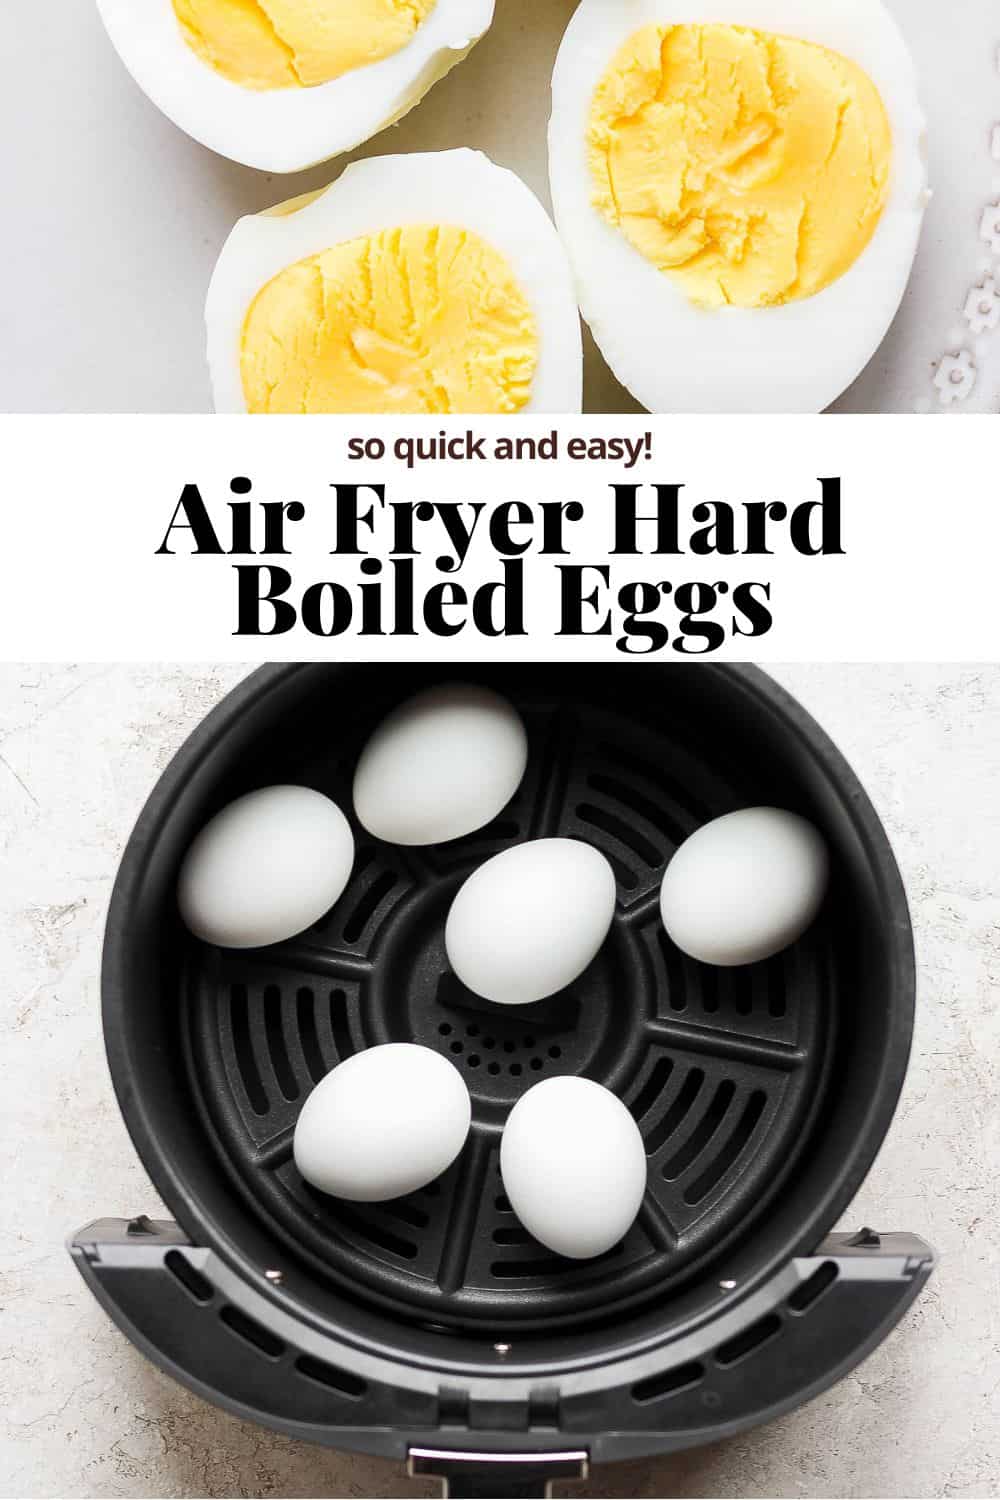 A hard boiled egg cut lengthwise, yolk side up on a plate, the recipe title, and then the bottom image shows 6 eggs in an air fryer basket.